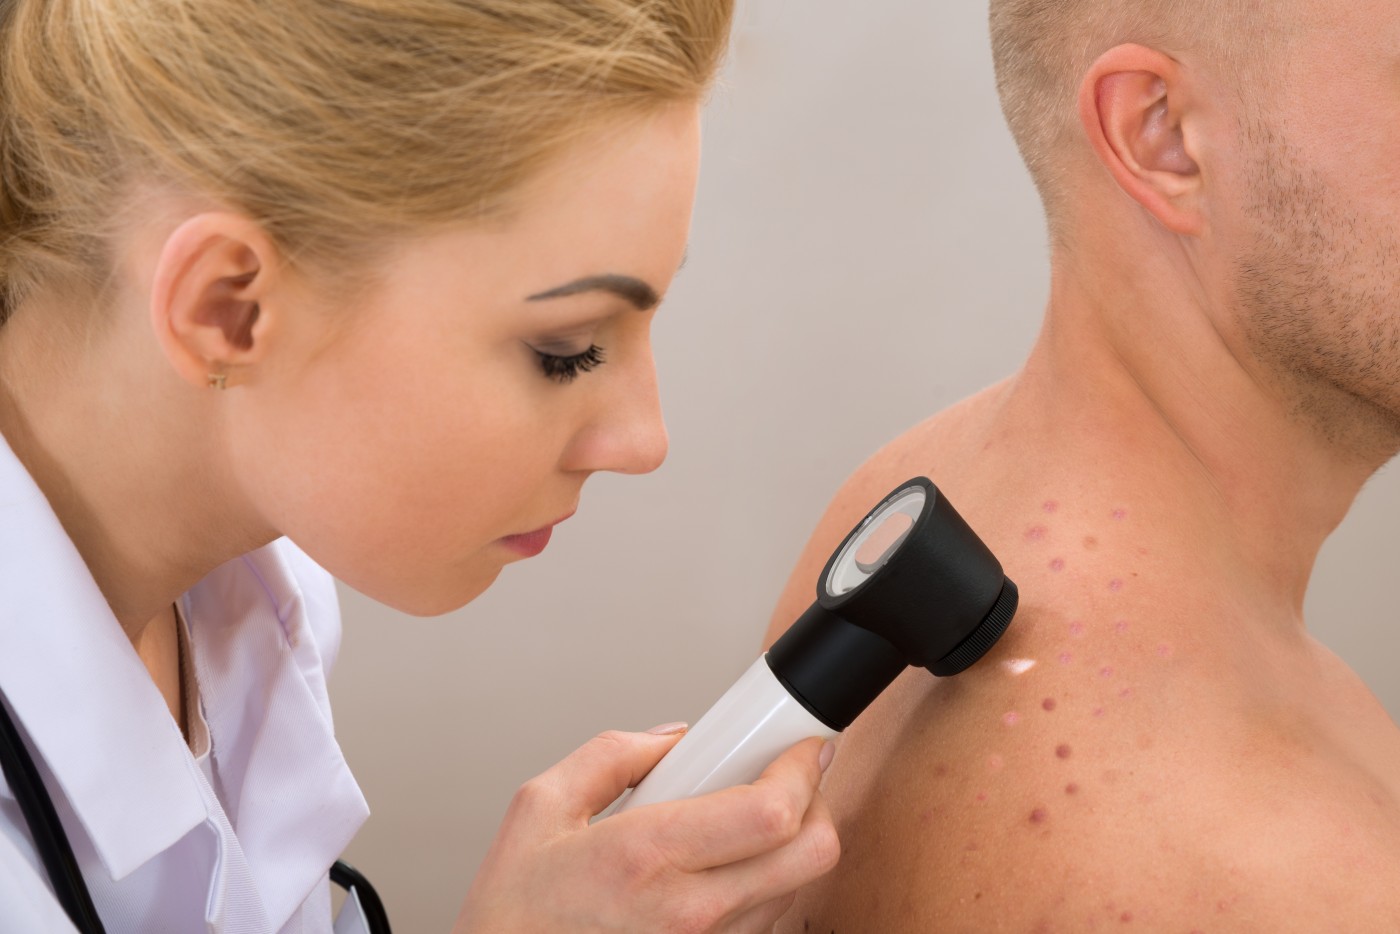 Pensioners in the UK More Likely To Be Diagnosed With Malignant Melanoma